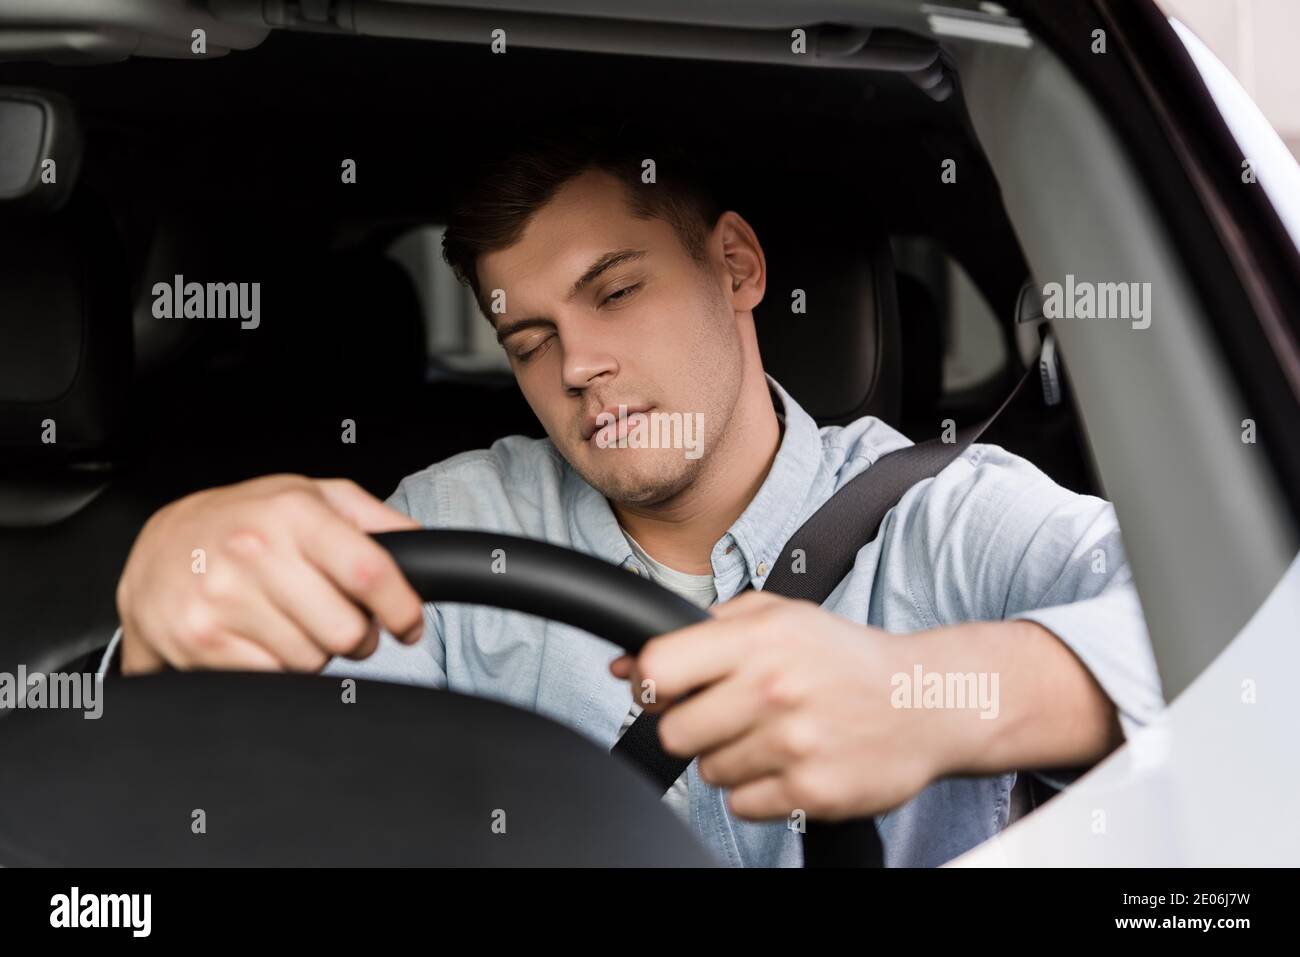 drunk man fall asleep while driving car, blurred foreground Stock Photo